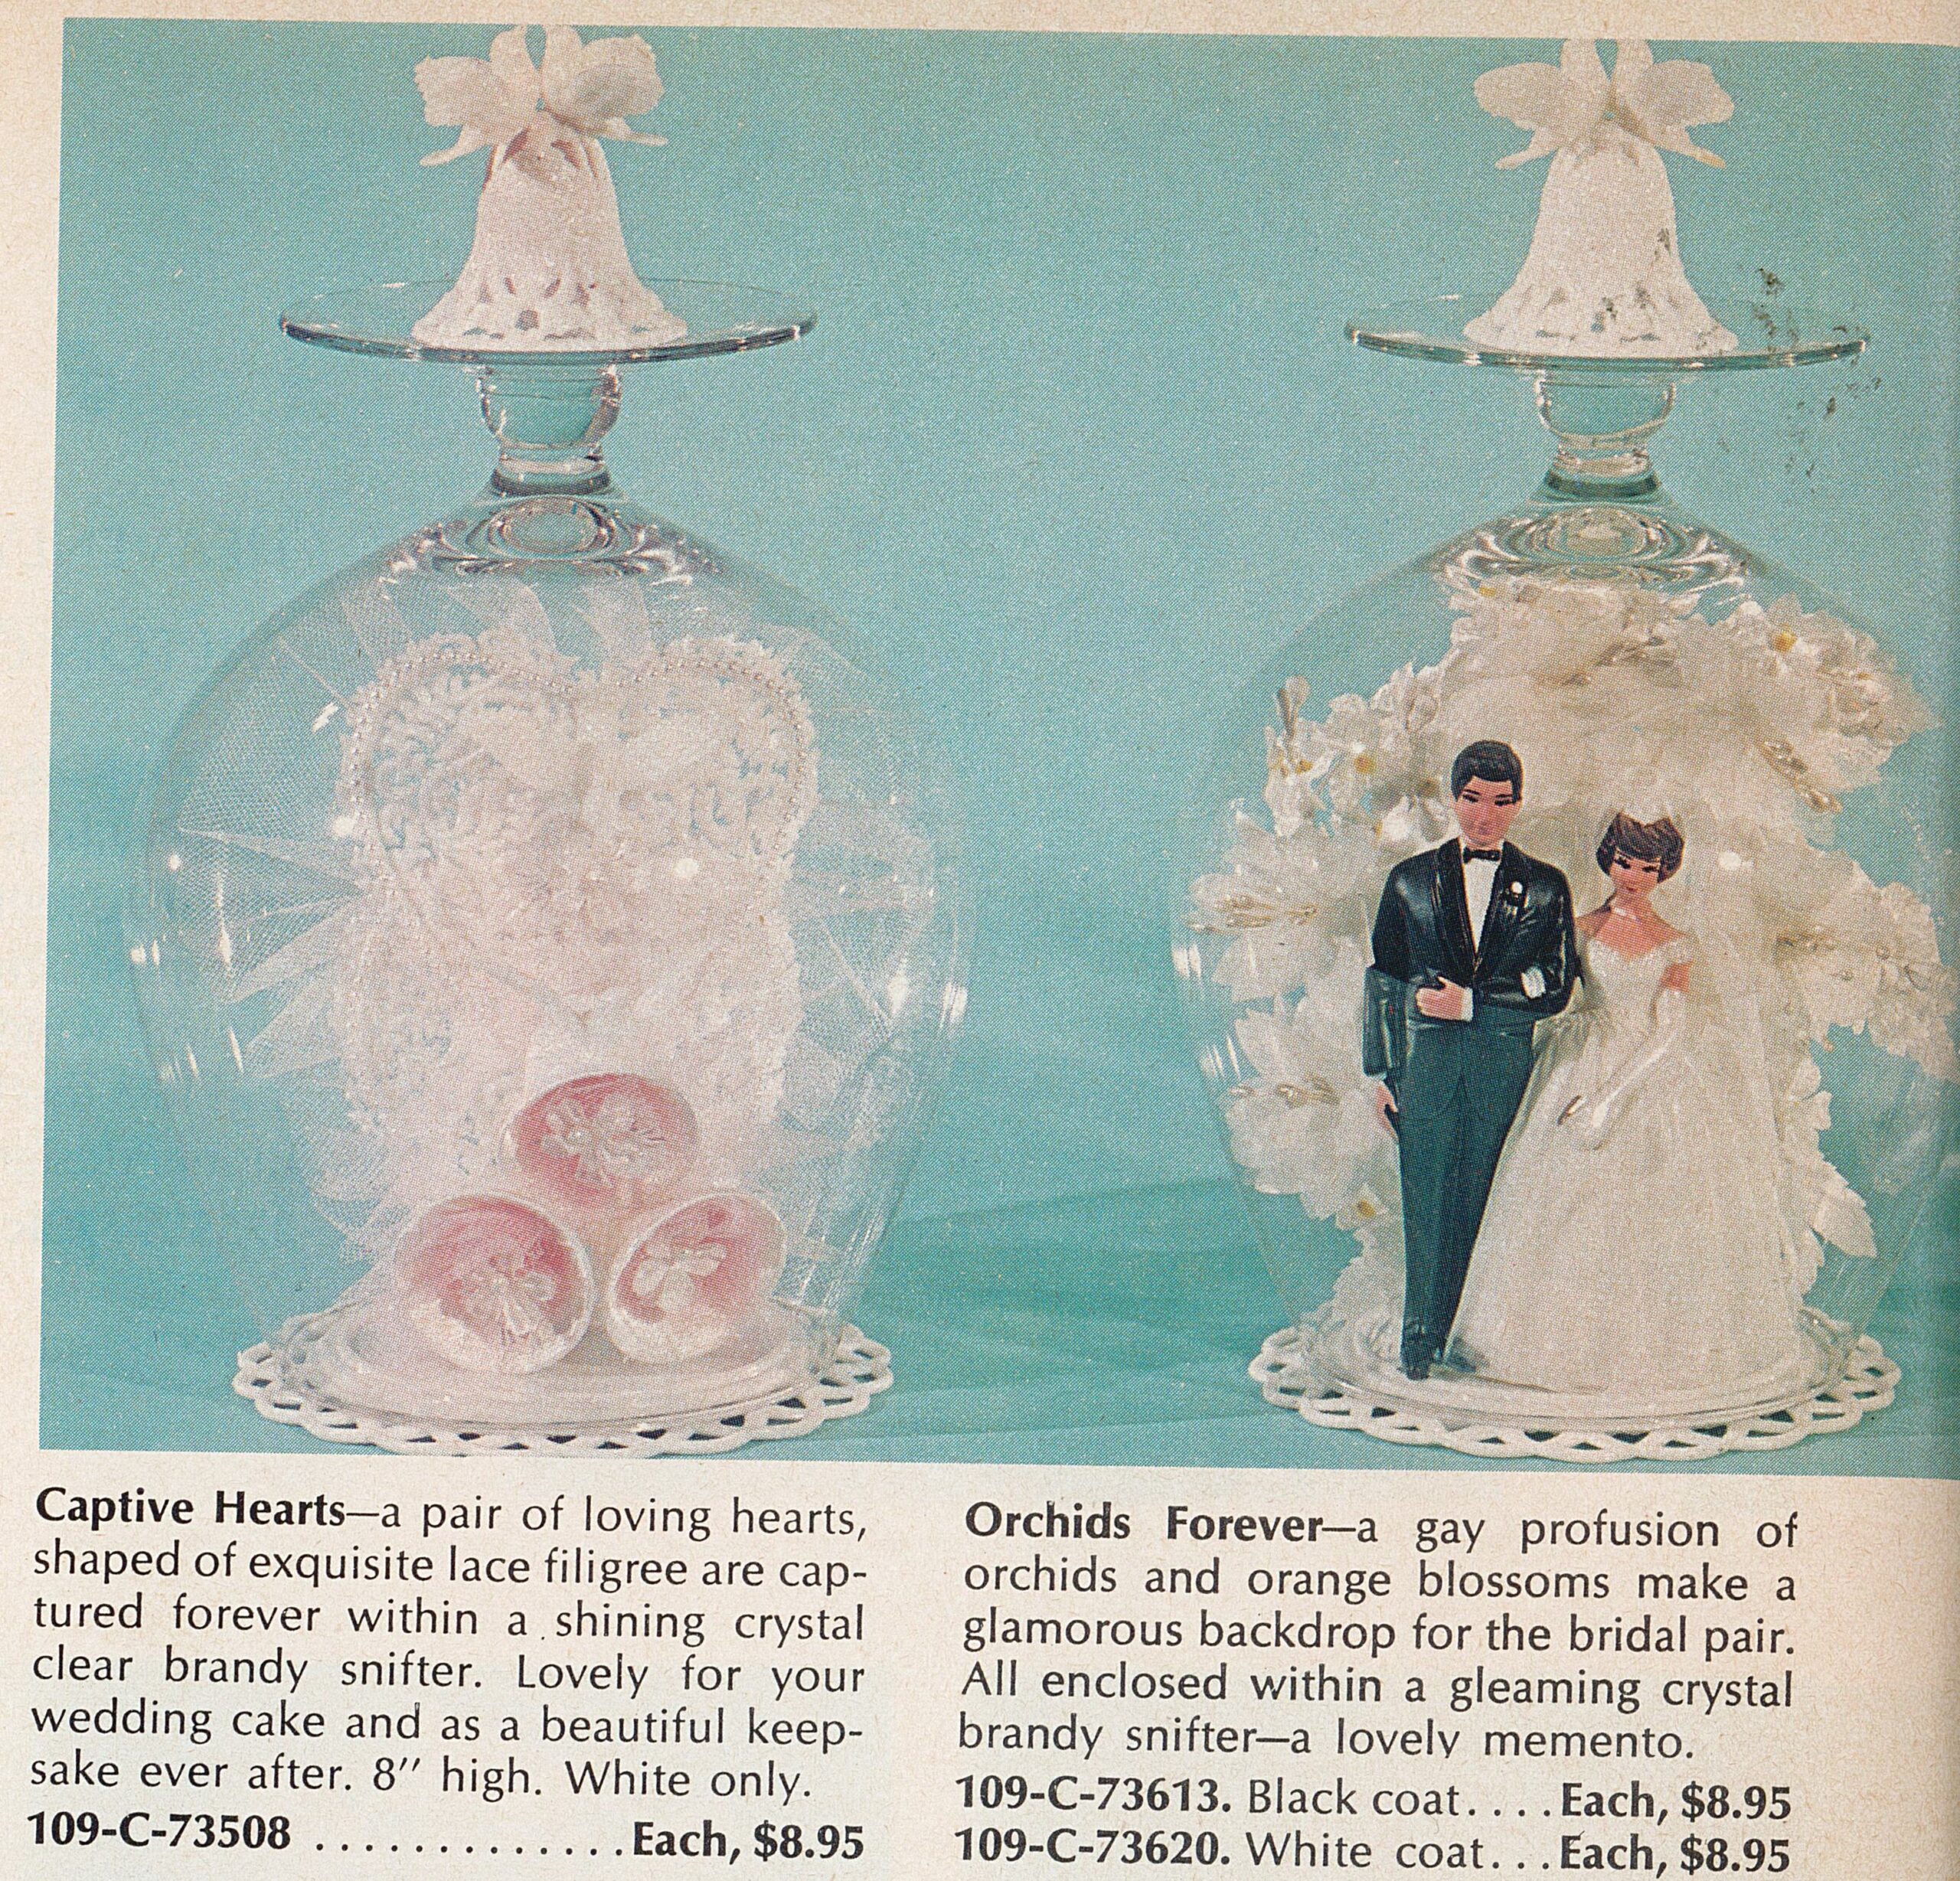 Two cake toppers, a set of bells with a heart and a bride and groom couple, sit on top of doilies and inside brandy snifter glasses